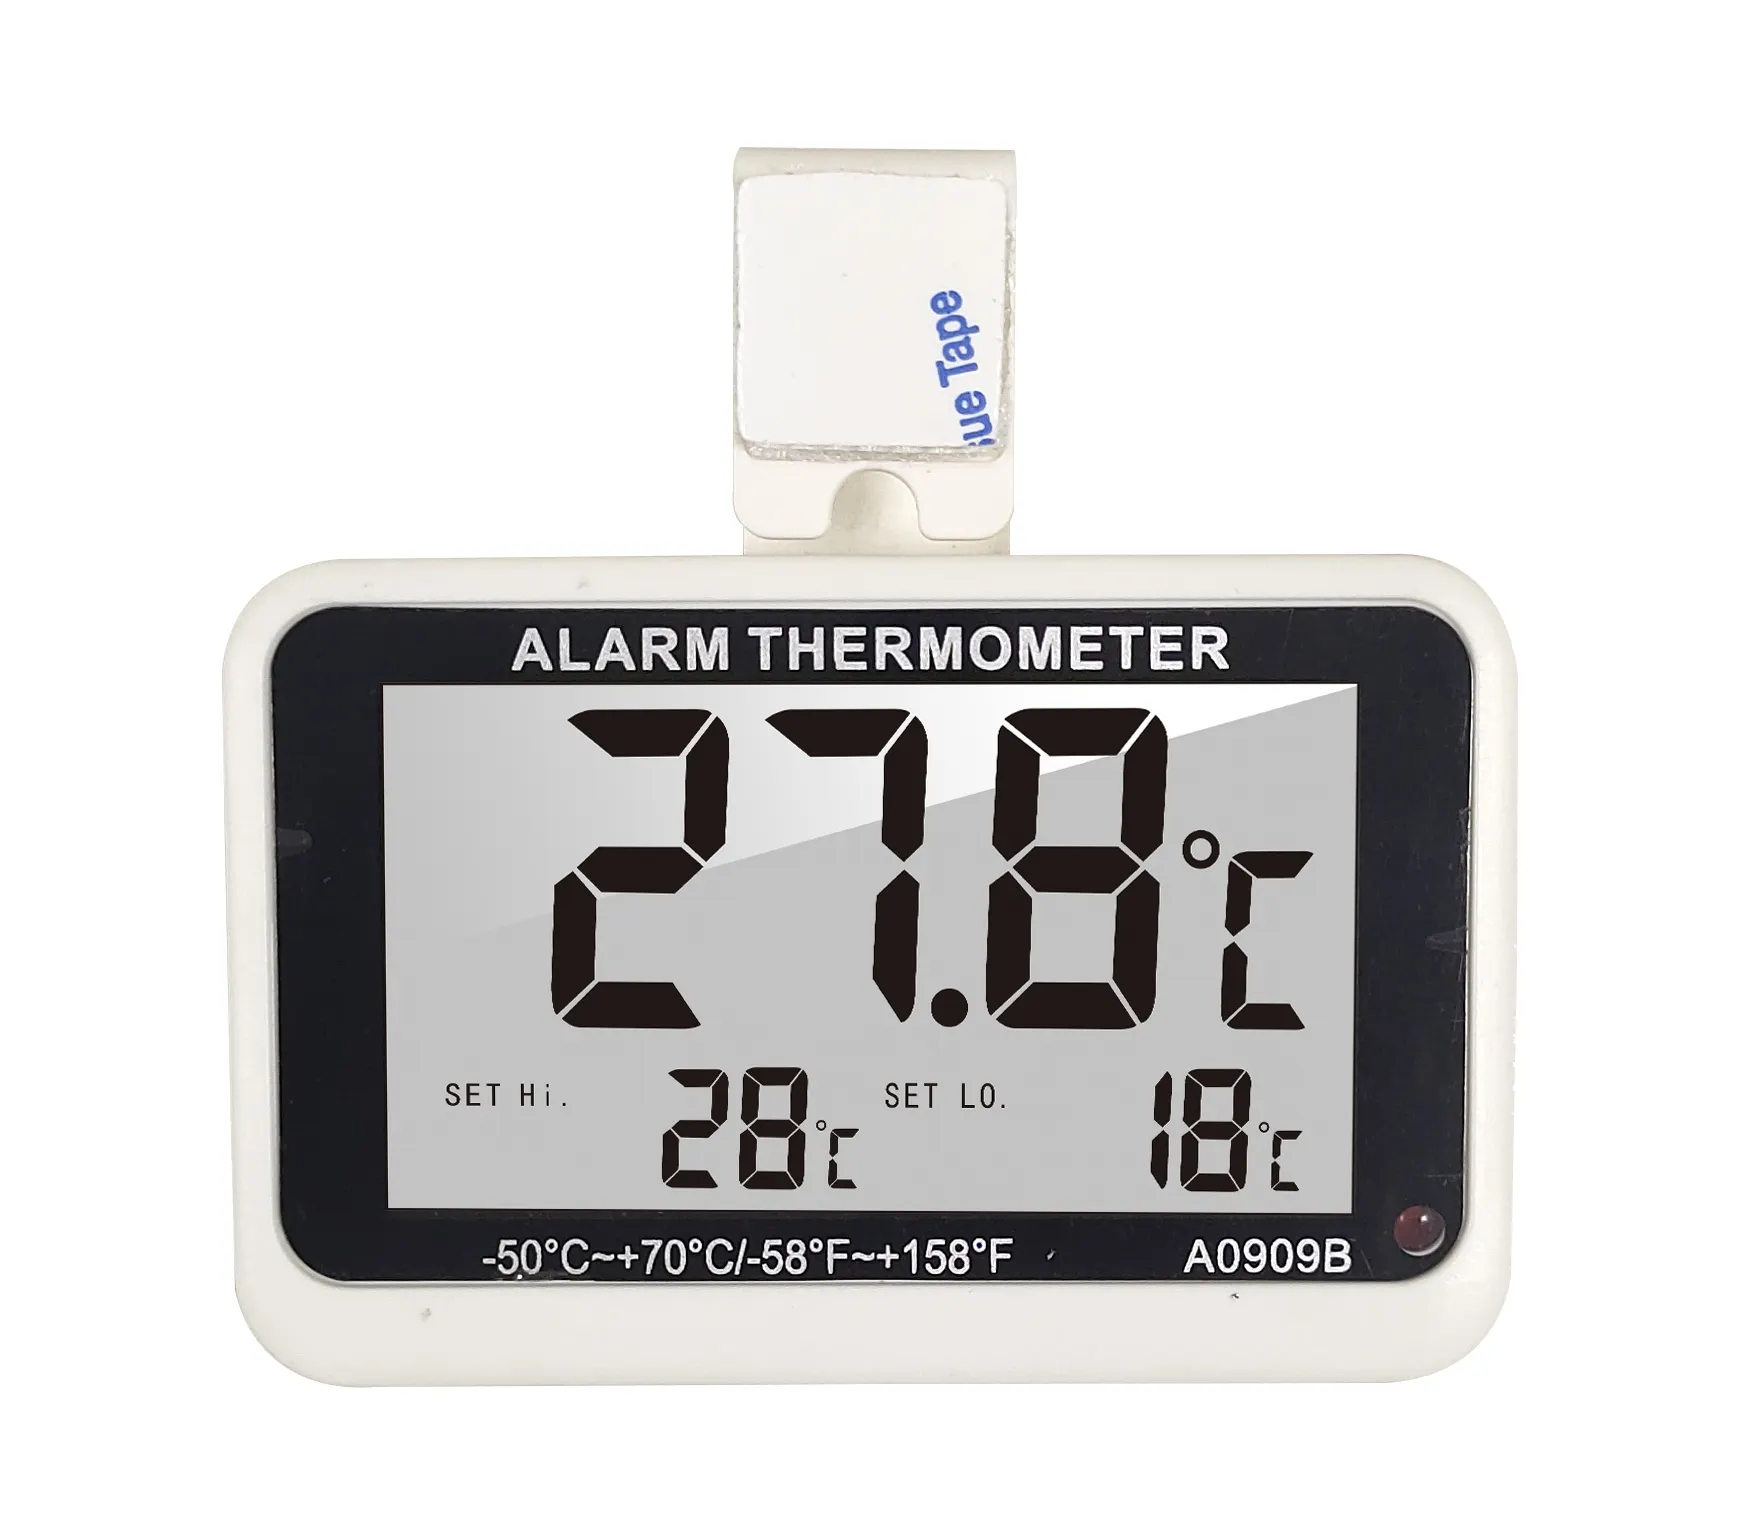 A0909B Digital Fridge Thermometer with Alarm and Max Min Temperature Feature Freezer Chiller Cooler